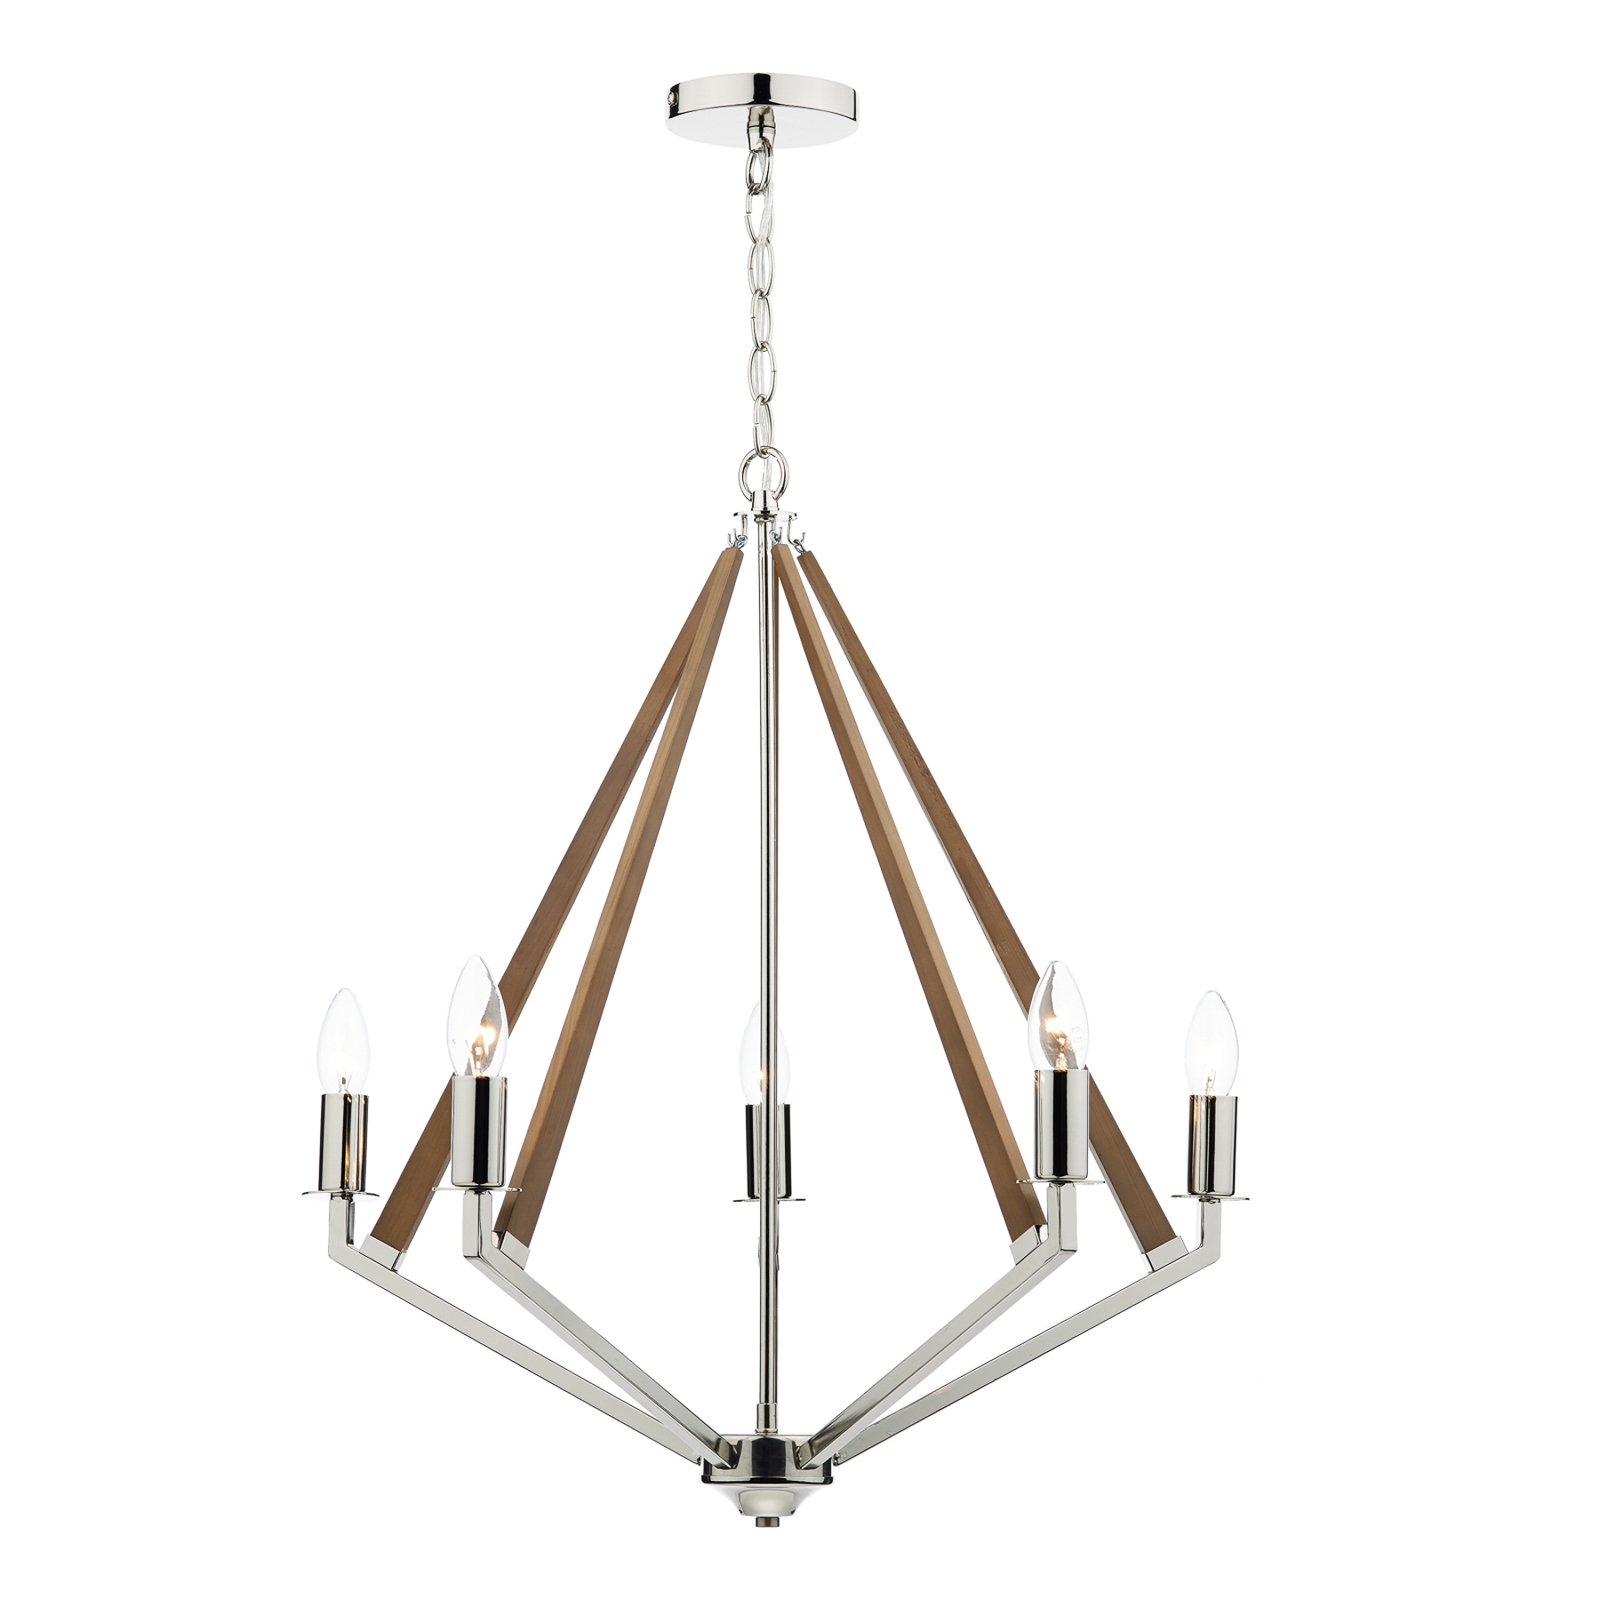 Hotel hanging light in nickel with wooden details